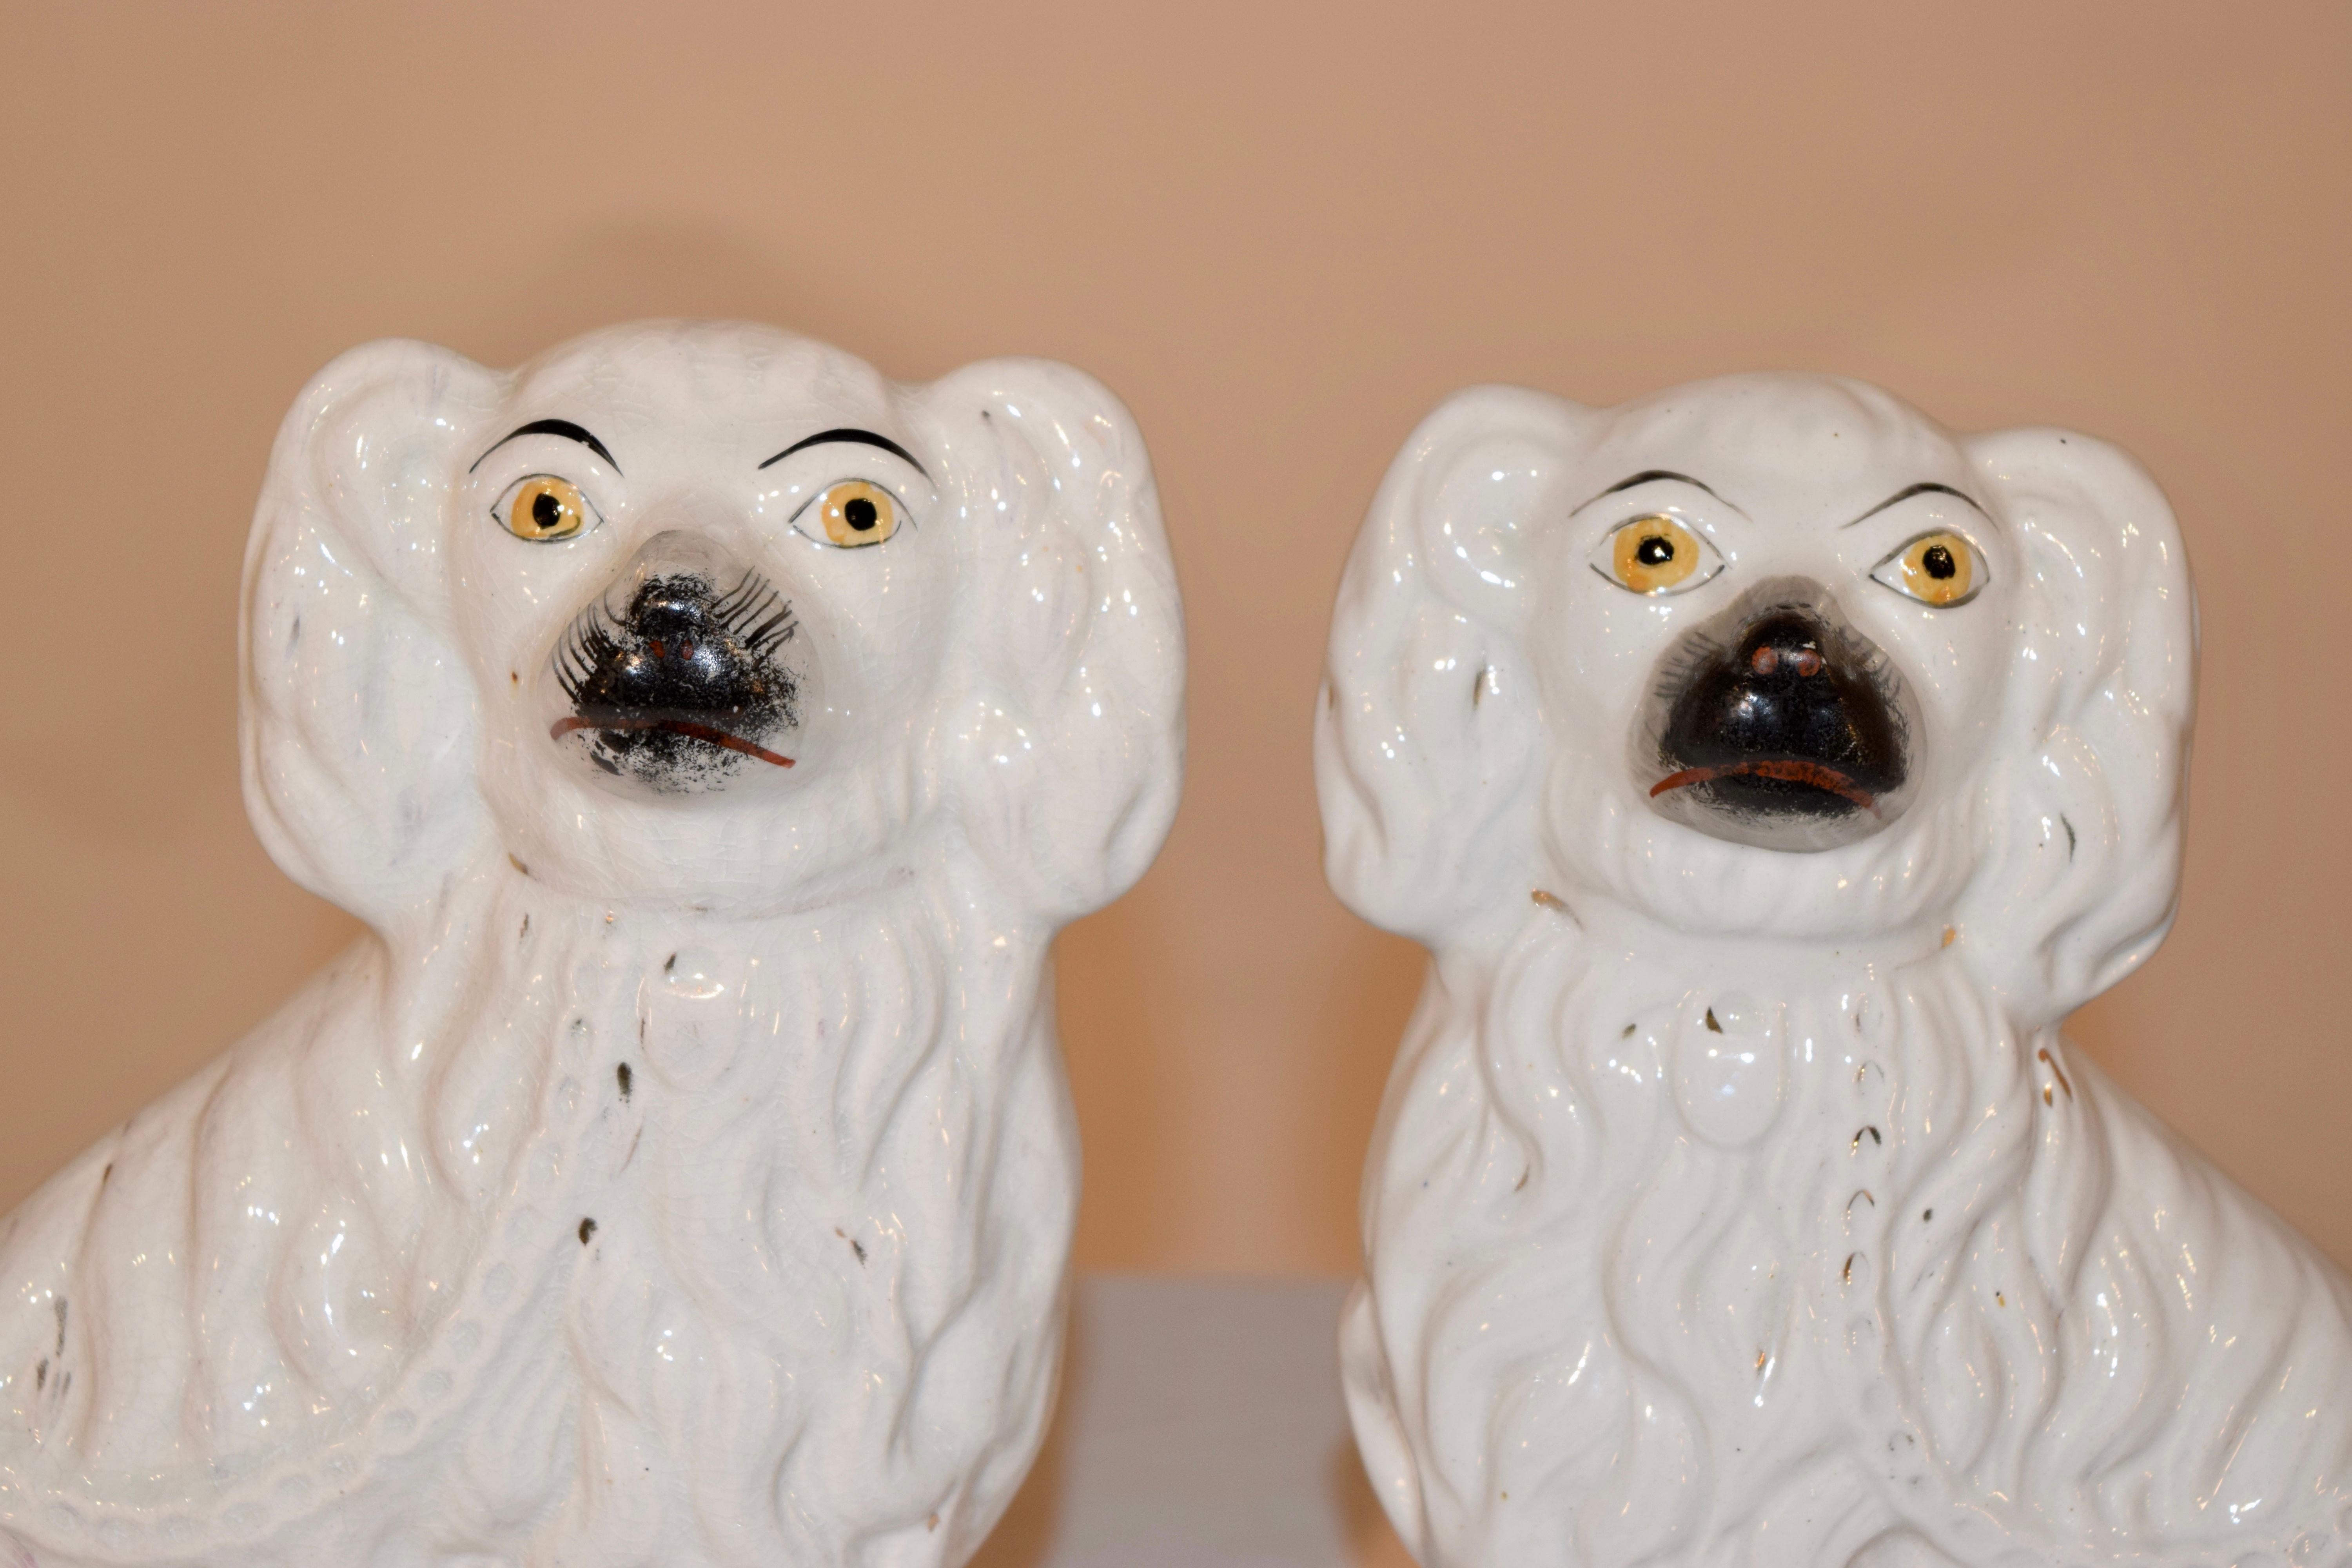 Pair of 19th century Staffordshire spaniels from England in white.